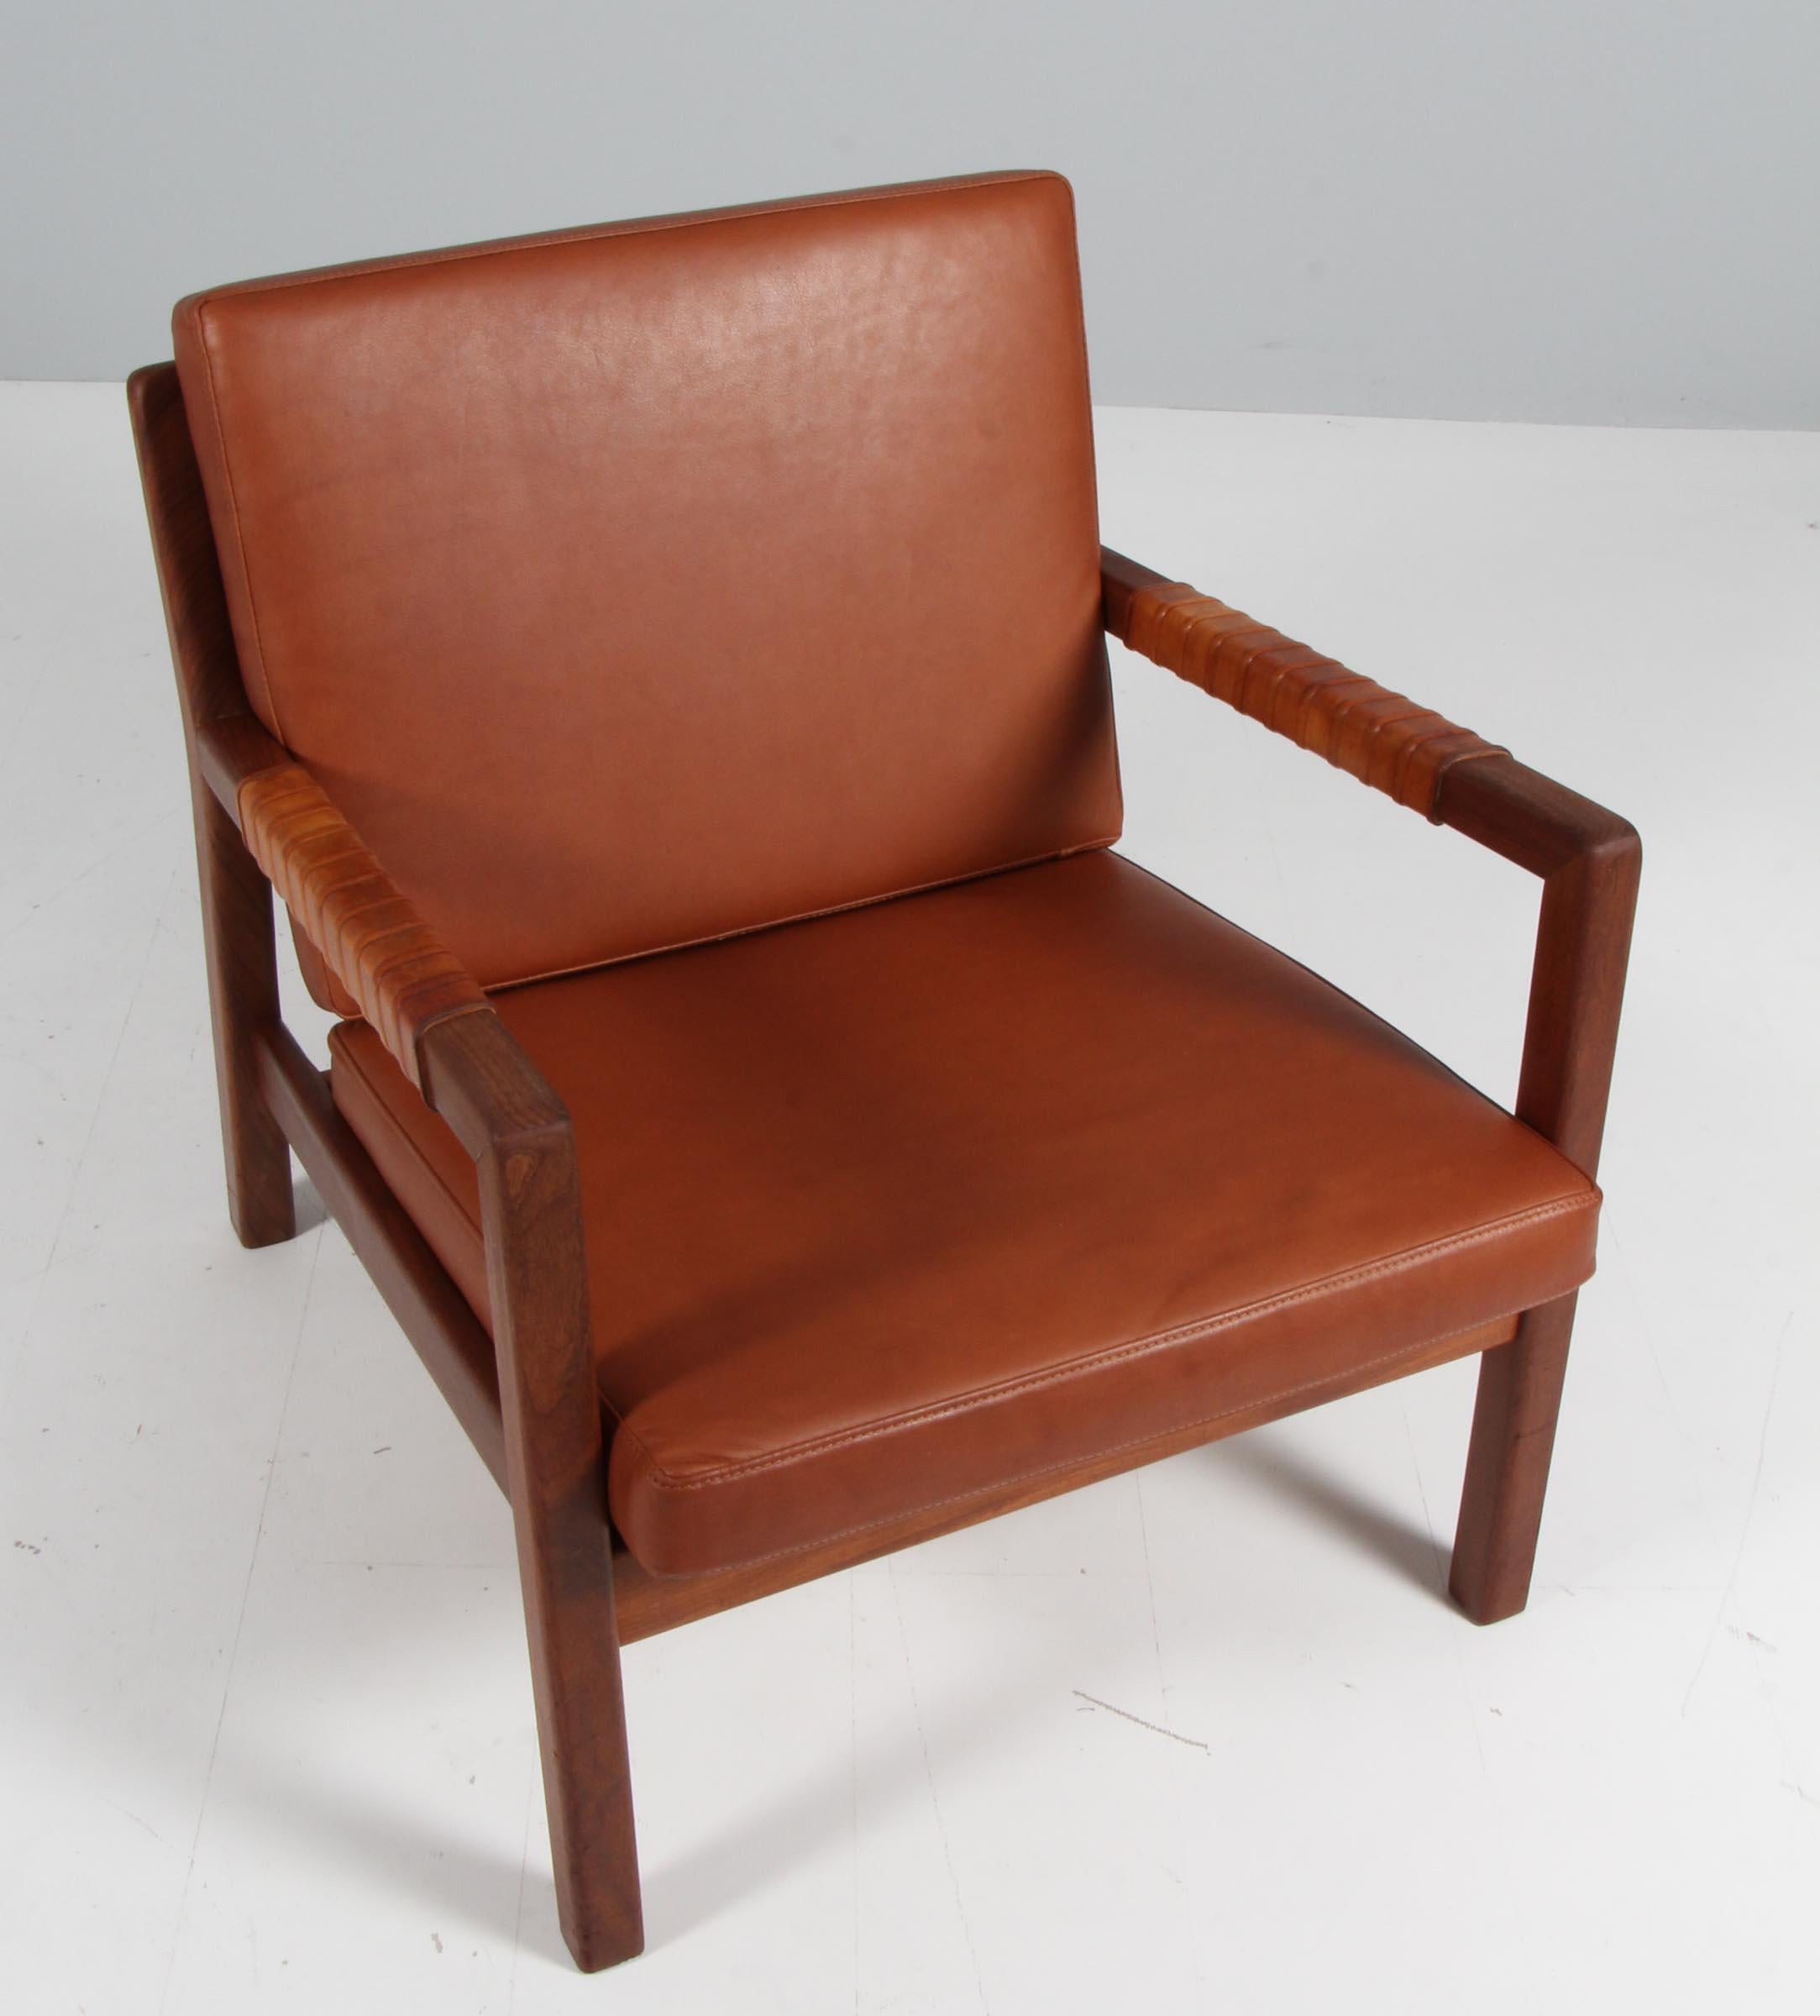 Lounge chair by Carl Gustav Hiort af Ornäs, 1950s
Rare lounge chair model Trienna by Carl-Gustav Hiort af Orna¨s, Finland, 1950s. Walnut, leather covered armrests, back with braided leather straps, loose cushions. New upholstered cushions.